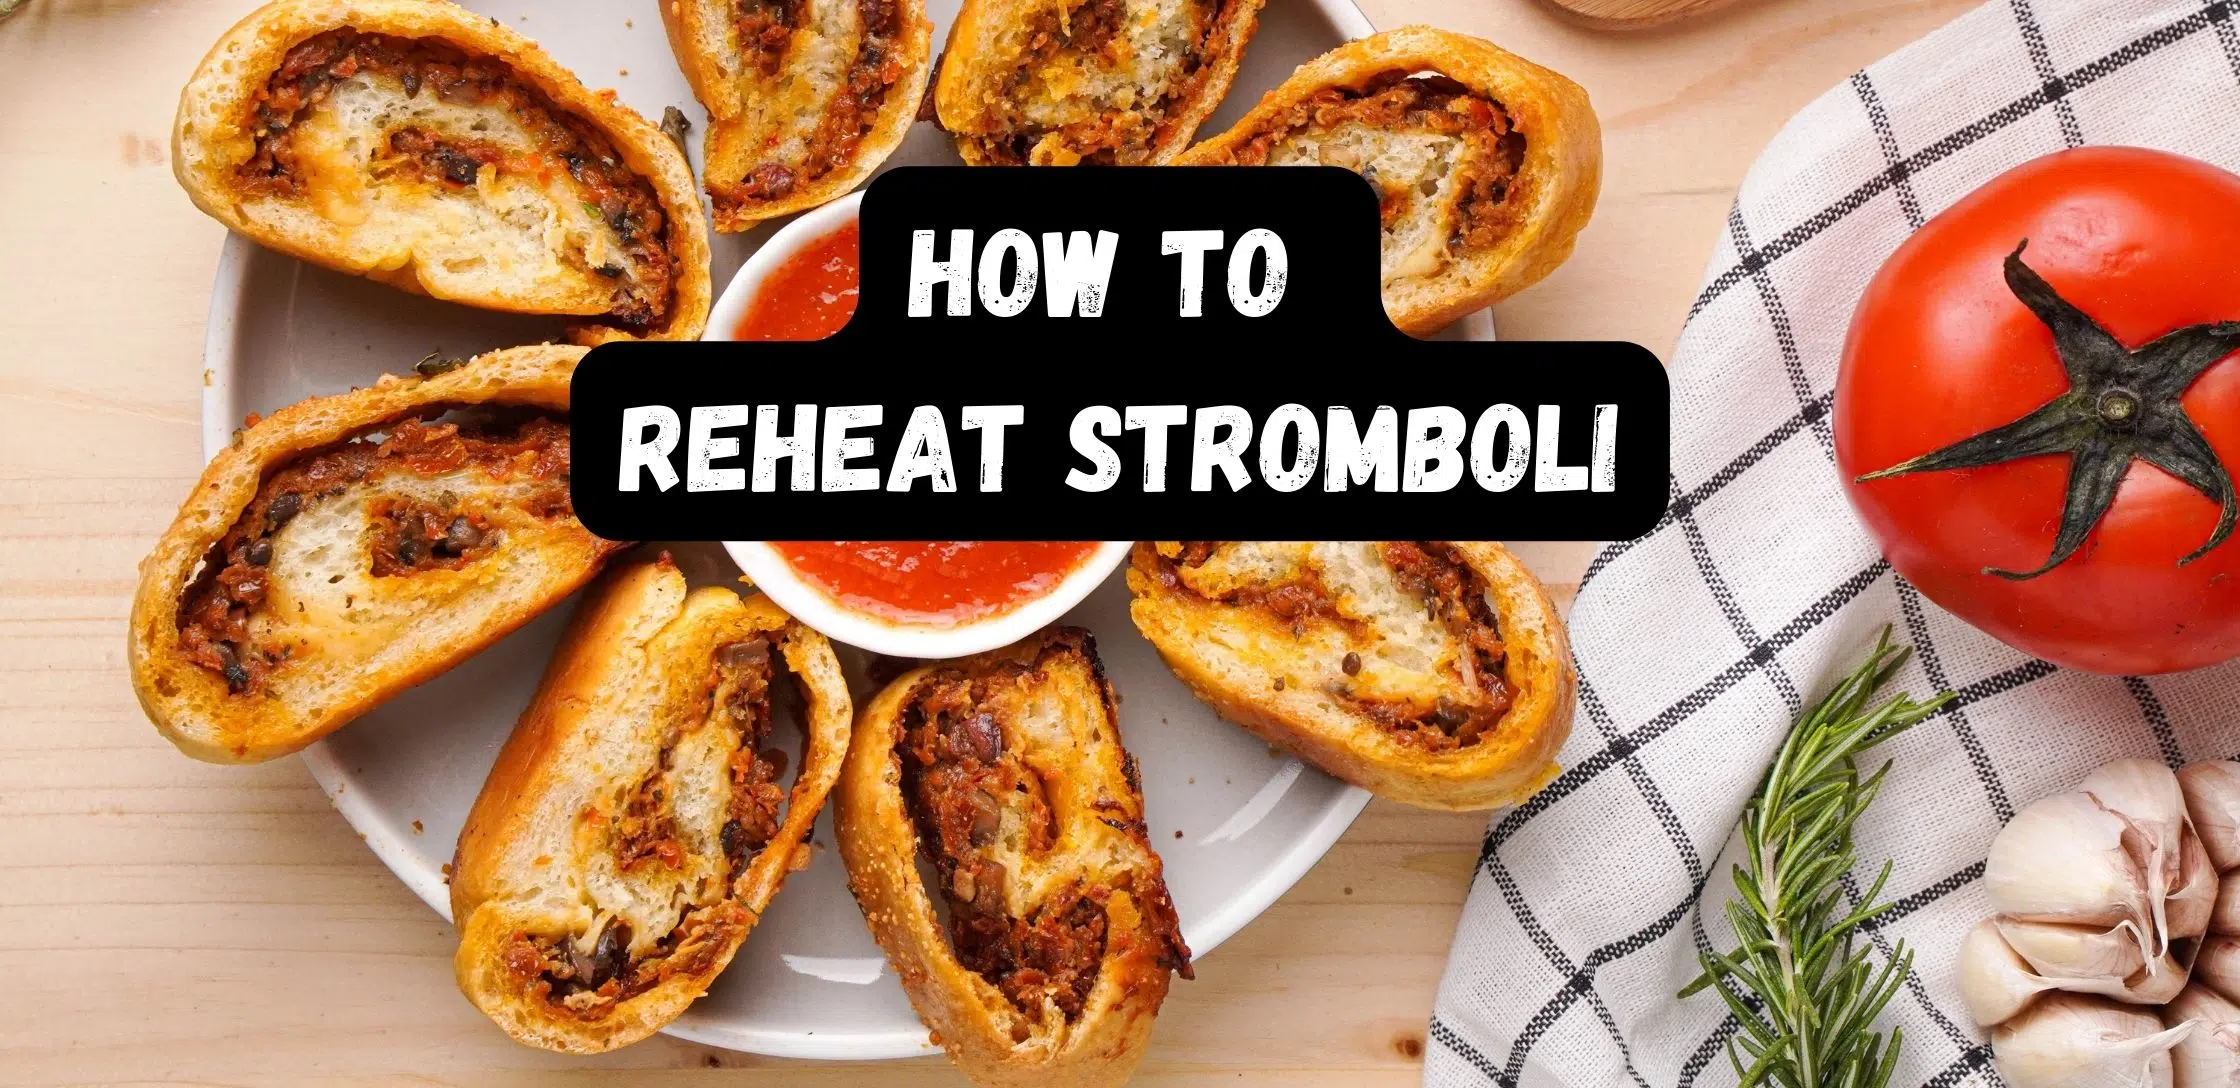 The Best Ways to Reheat Stromboli: Oven, Toaster Oven, Microwave, Air Fryer, and Skillet